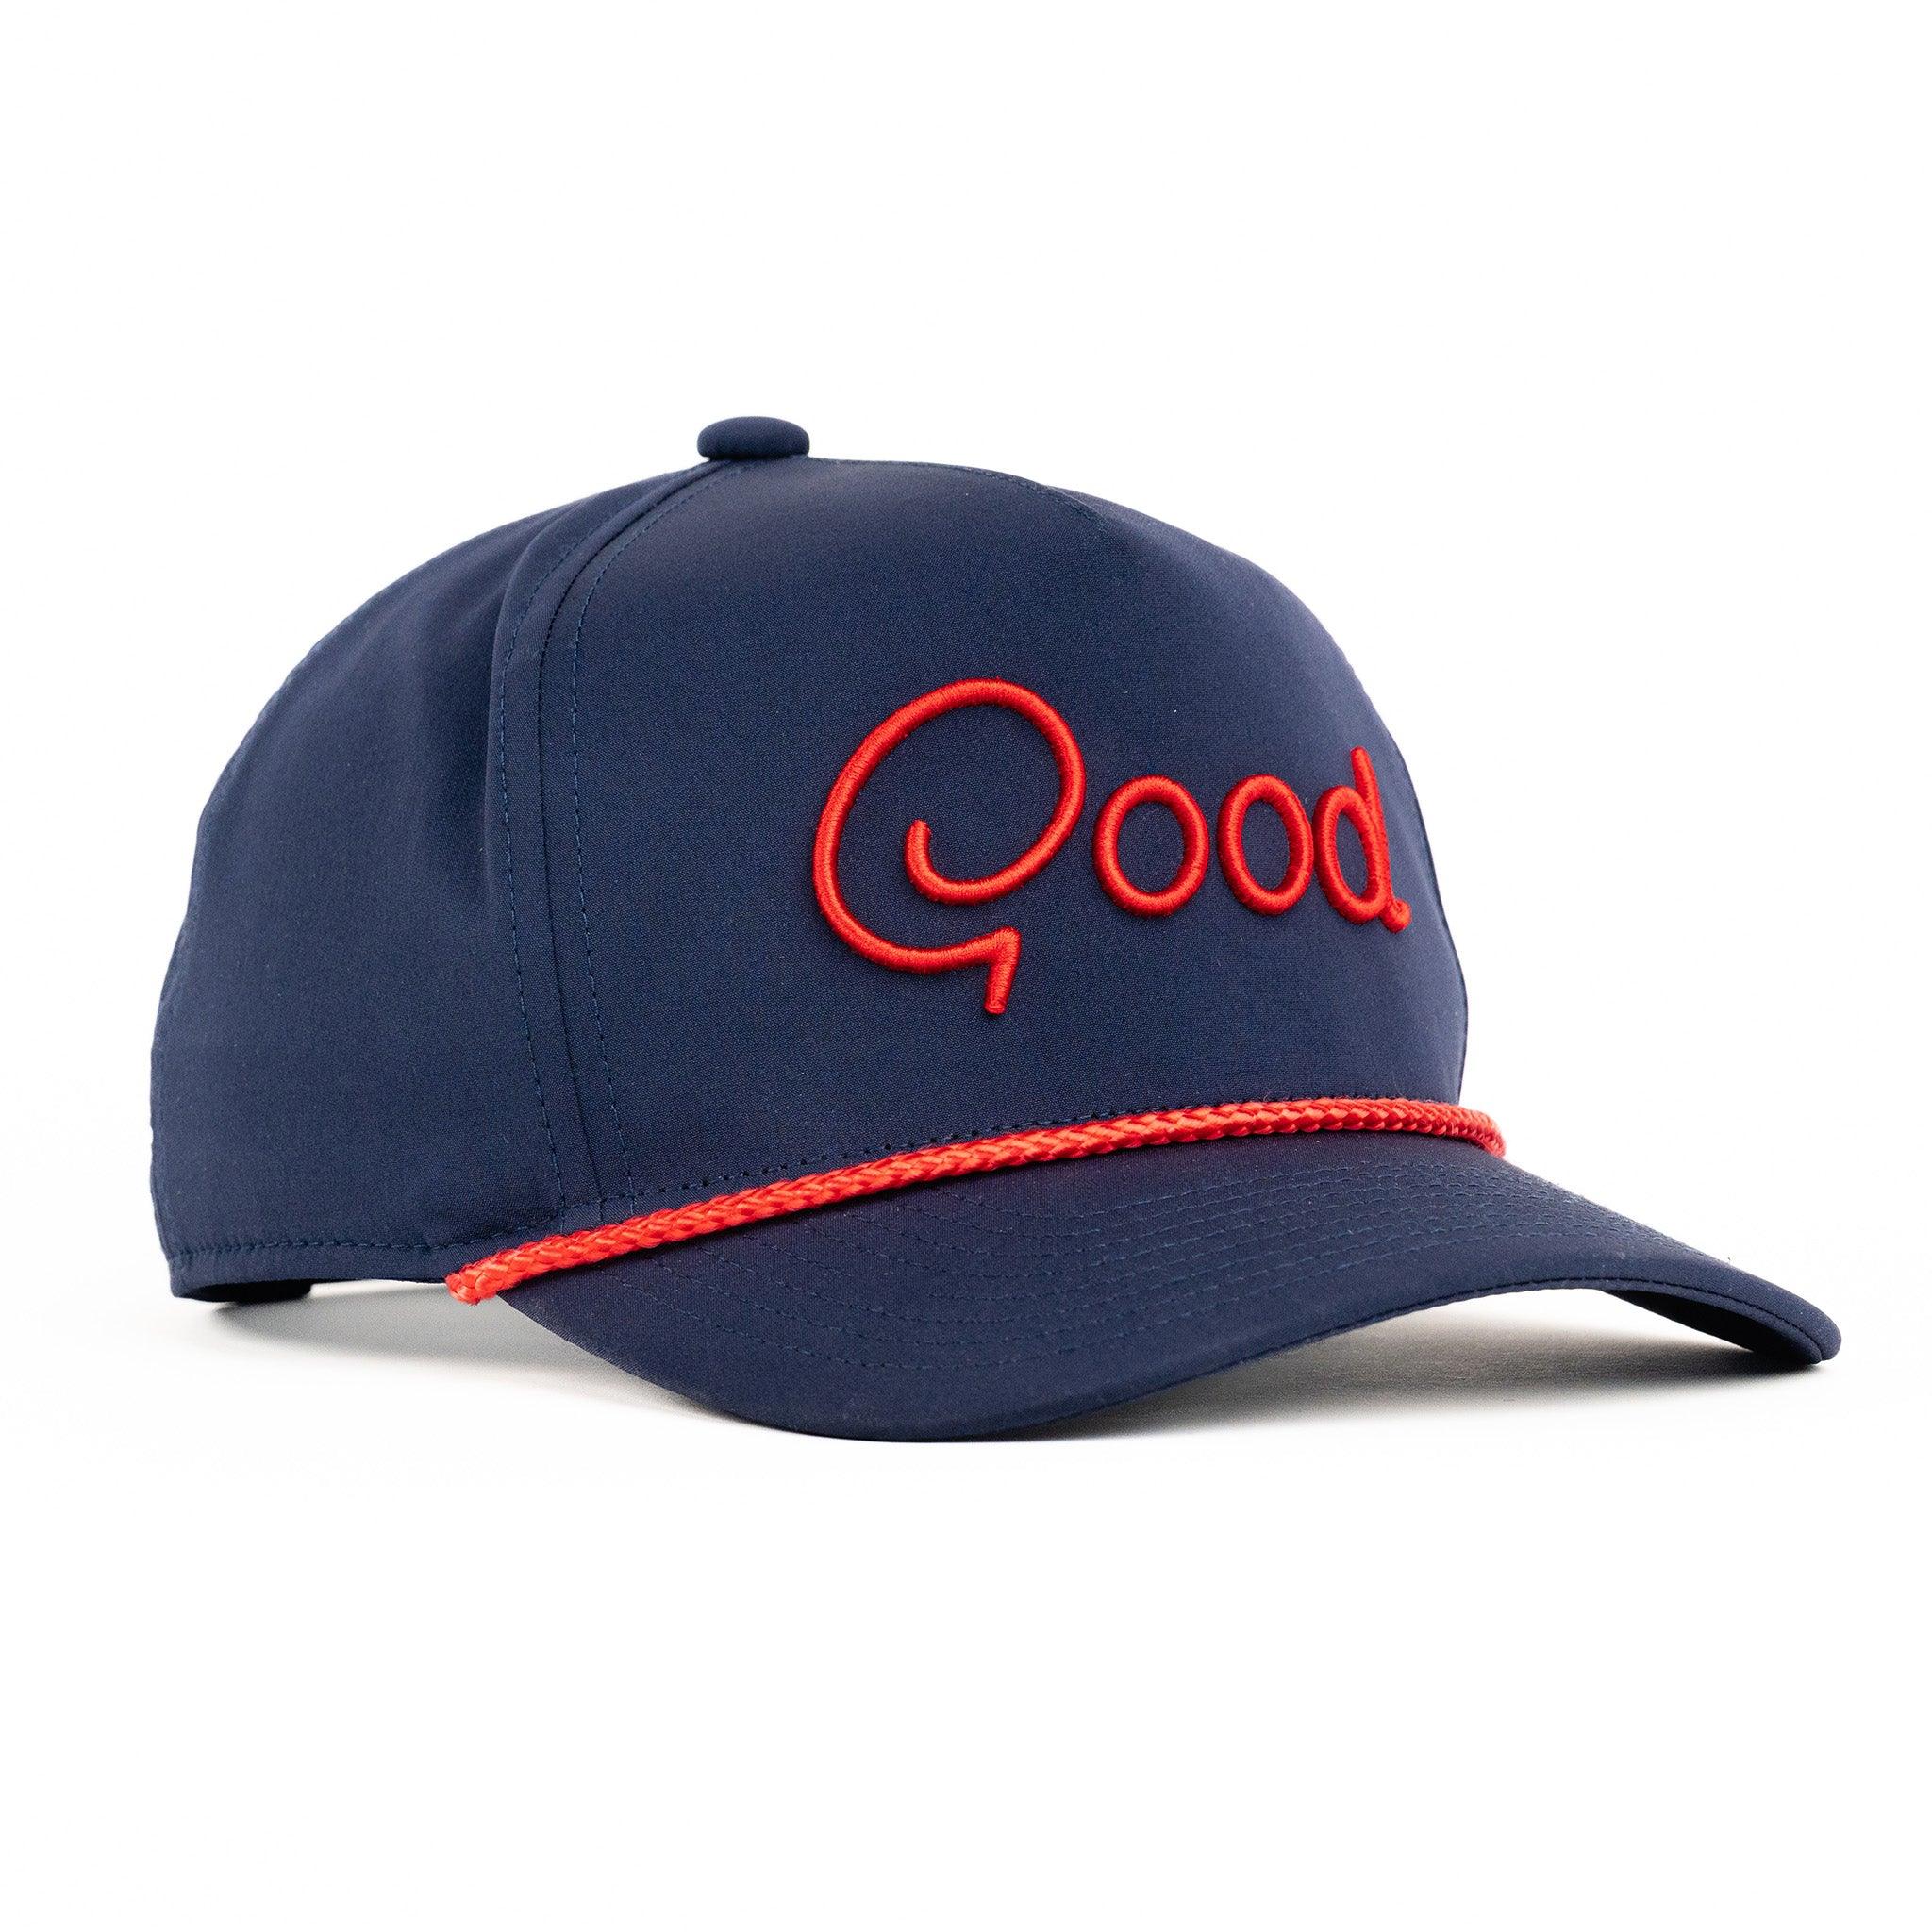 Freedom Rope Hat - Best Rope Golf Hat By Good Good Golf